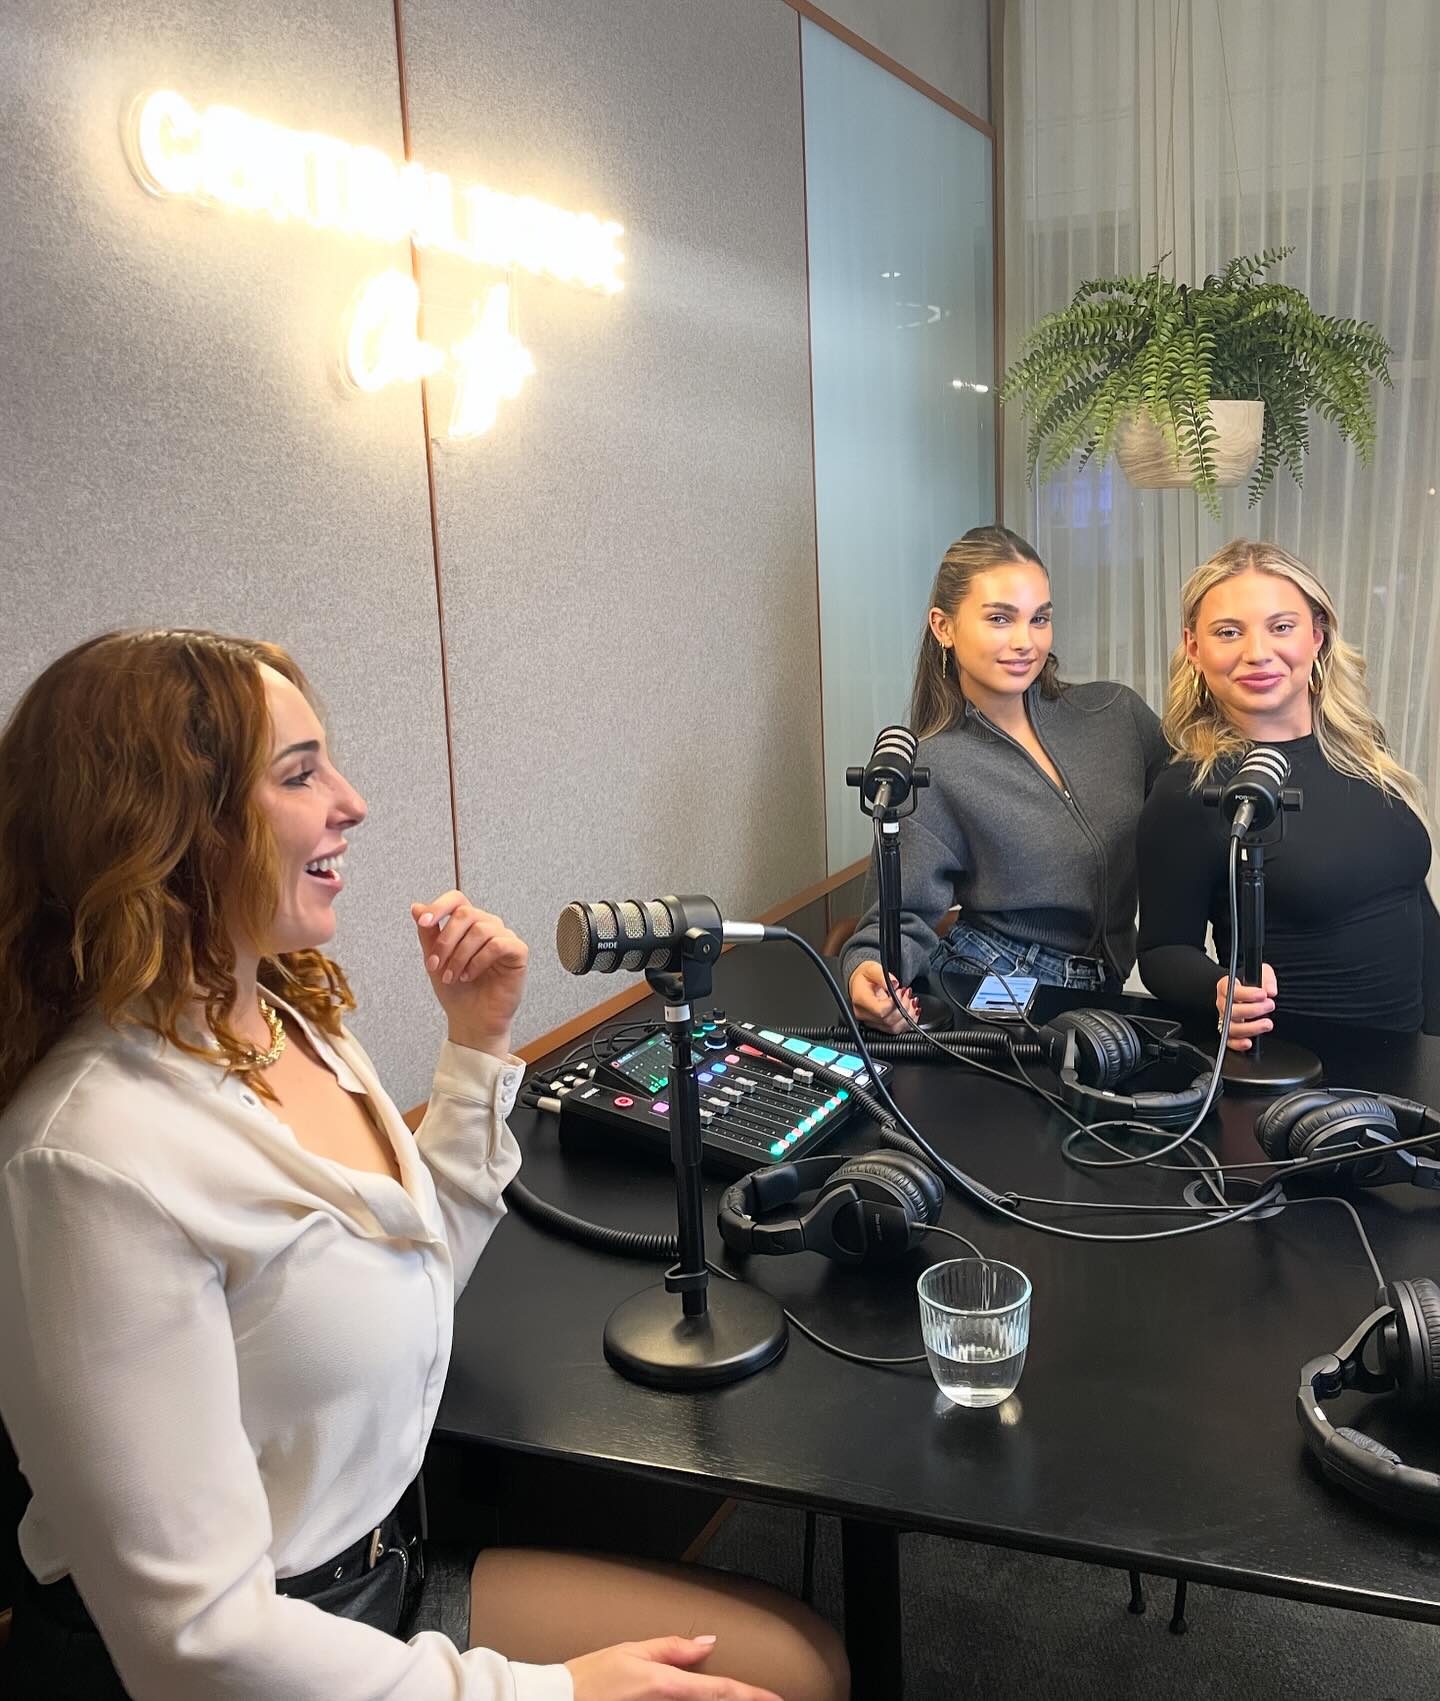 Thank you @s4mguggs and @izzyarmitage for having me on @justforgirrls podcast today. So many laughs were had! Can’t wait for everyone to hear our very interesting conversations on intimacy, relationships, streaming, the sugar bowl, and salt daddies 💅😂

Out NOW! Listen wherever you get your podcasts 🎧